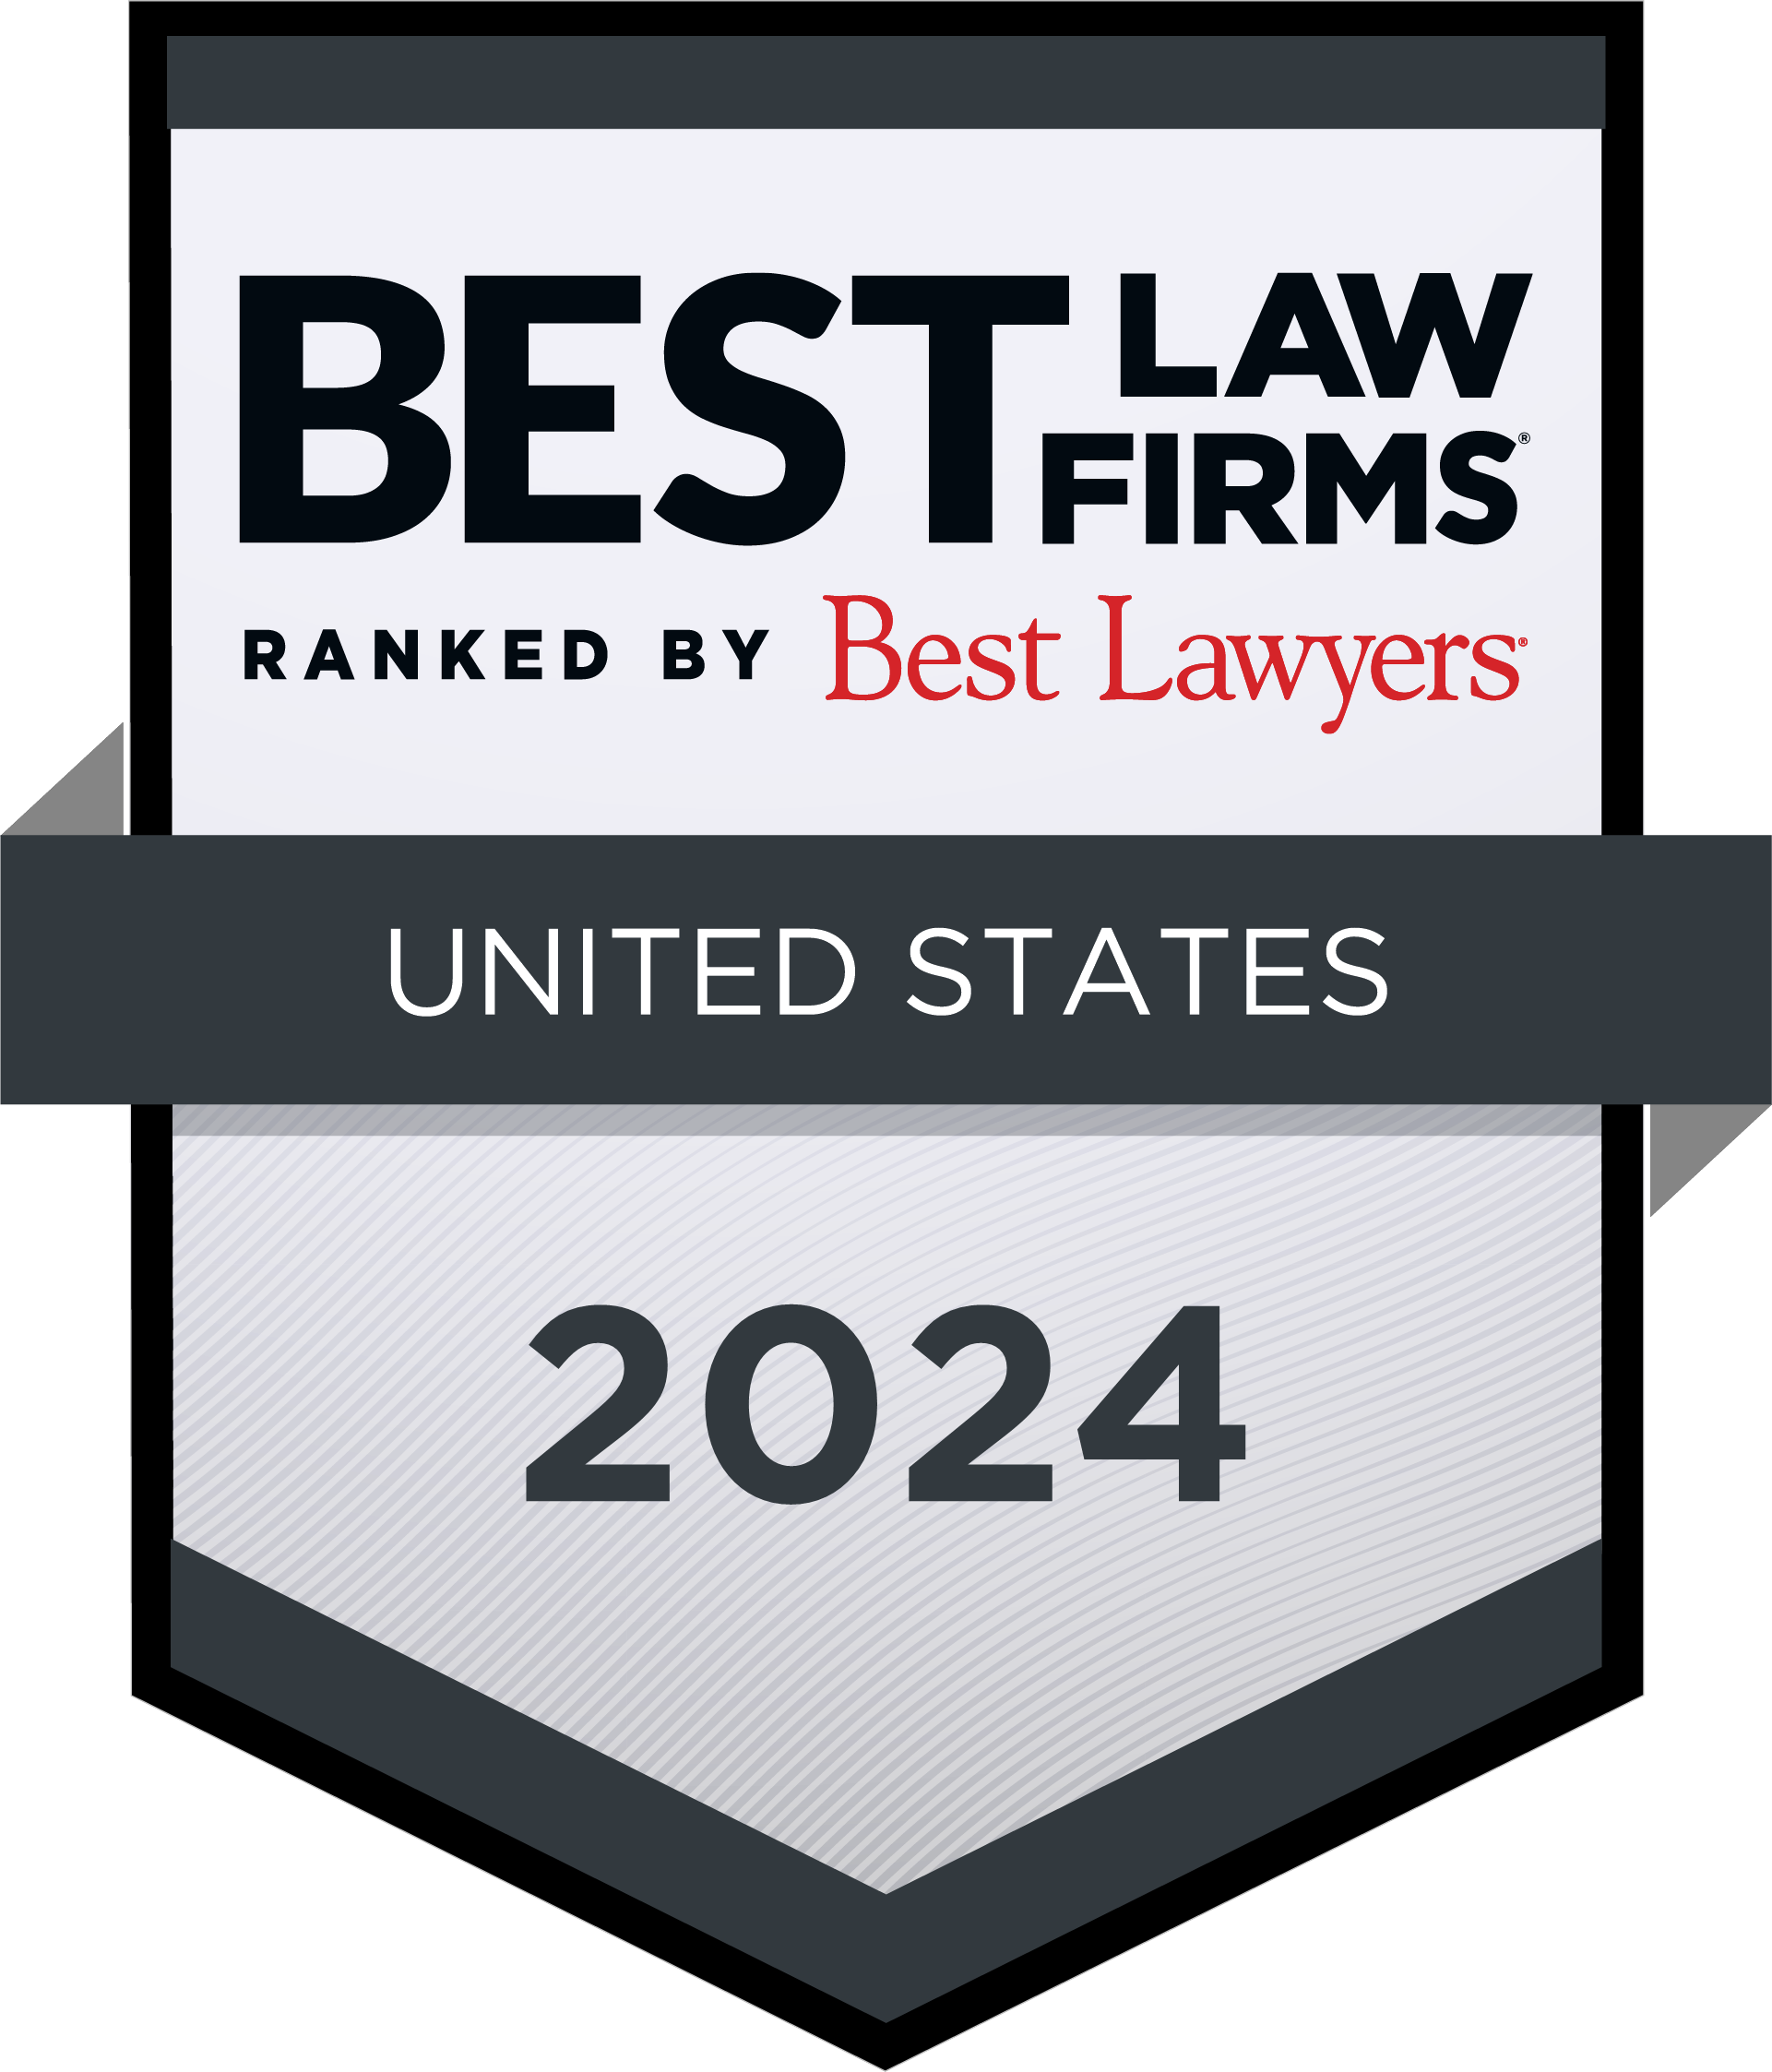 Best Law Firms - Standard Badge.png